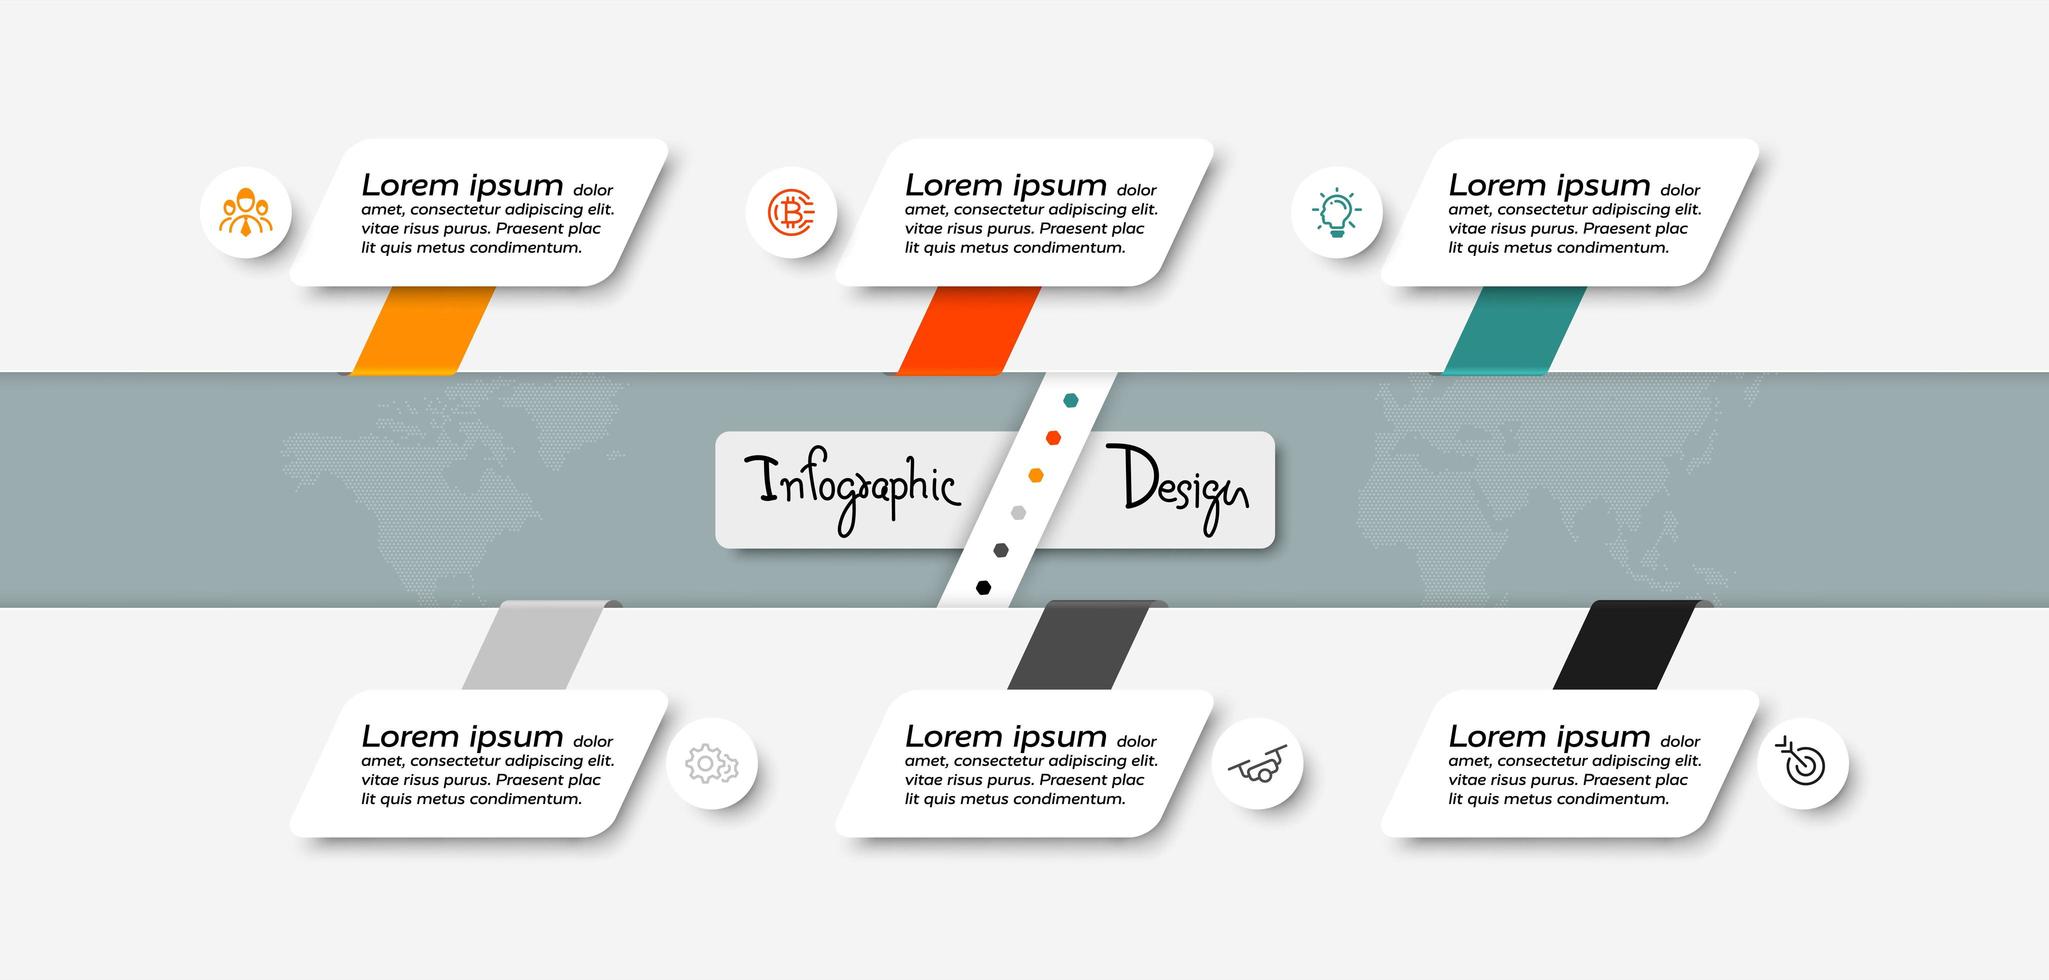 Organization and design diagrams are used to describe planning and describe functions. infographic. vector